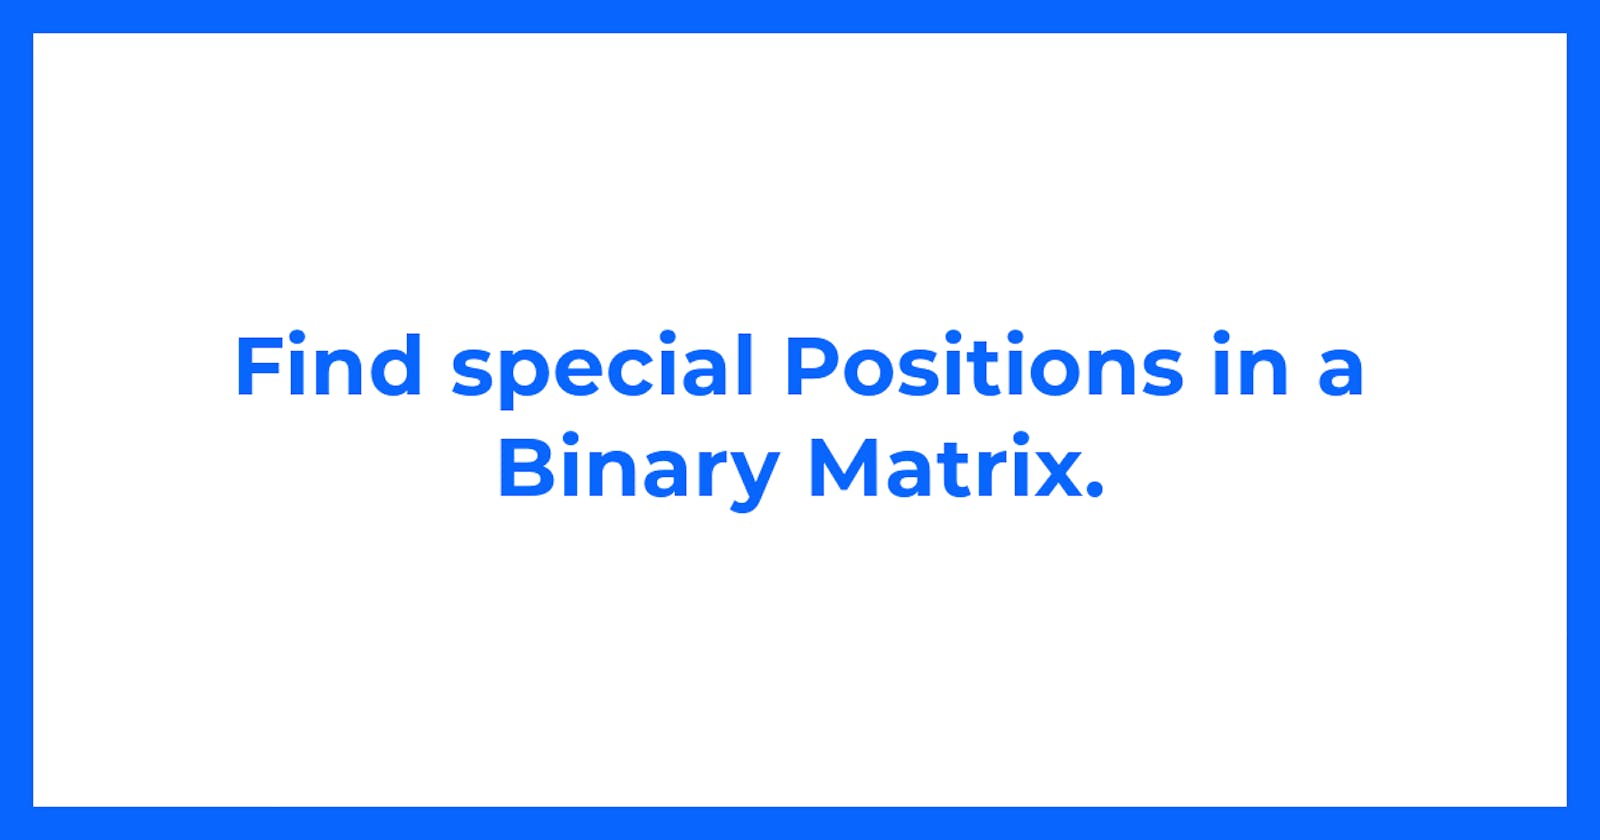 Find special Positions in a Binary Matrix.